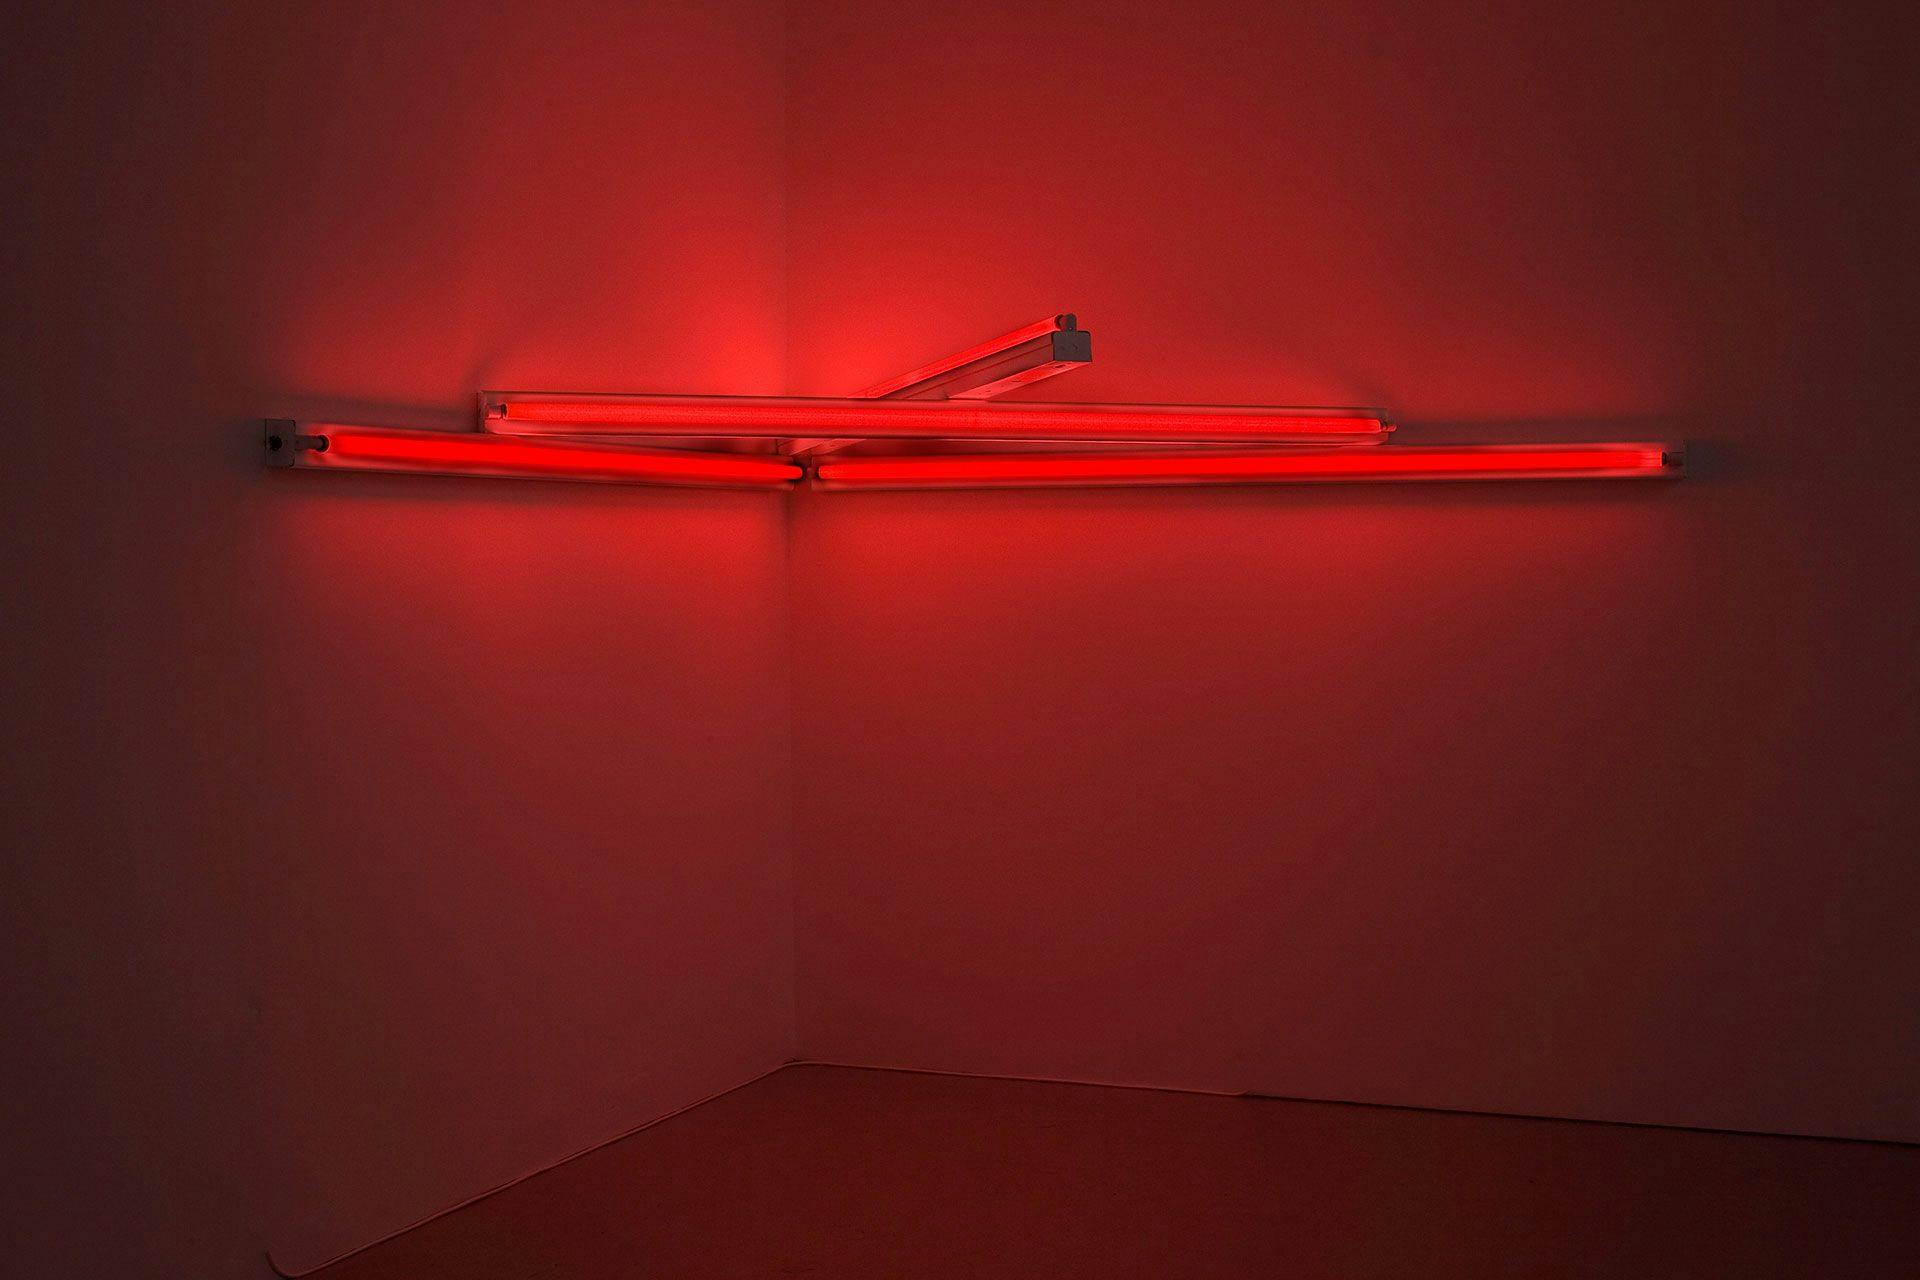 A sculpture in red fluorescent light by Dan Flavin, titled monument 4 for those who have been killed in ambush (to P.K. who reminded me about death), dated 1966.